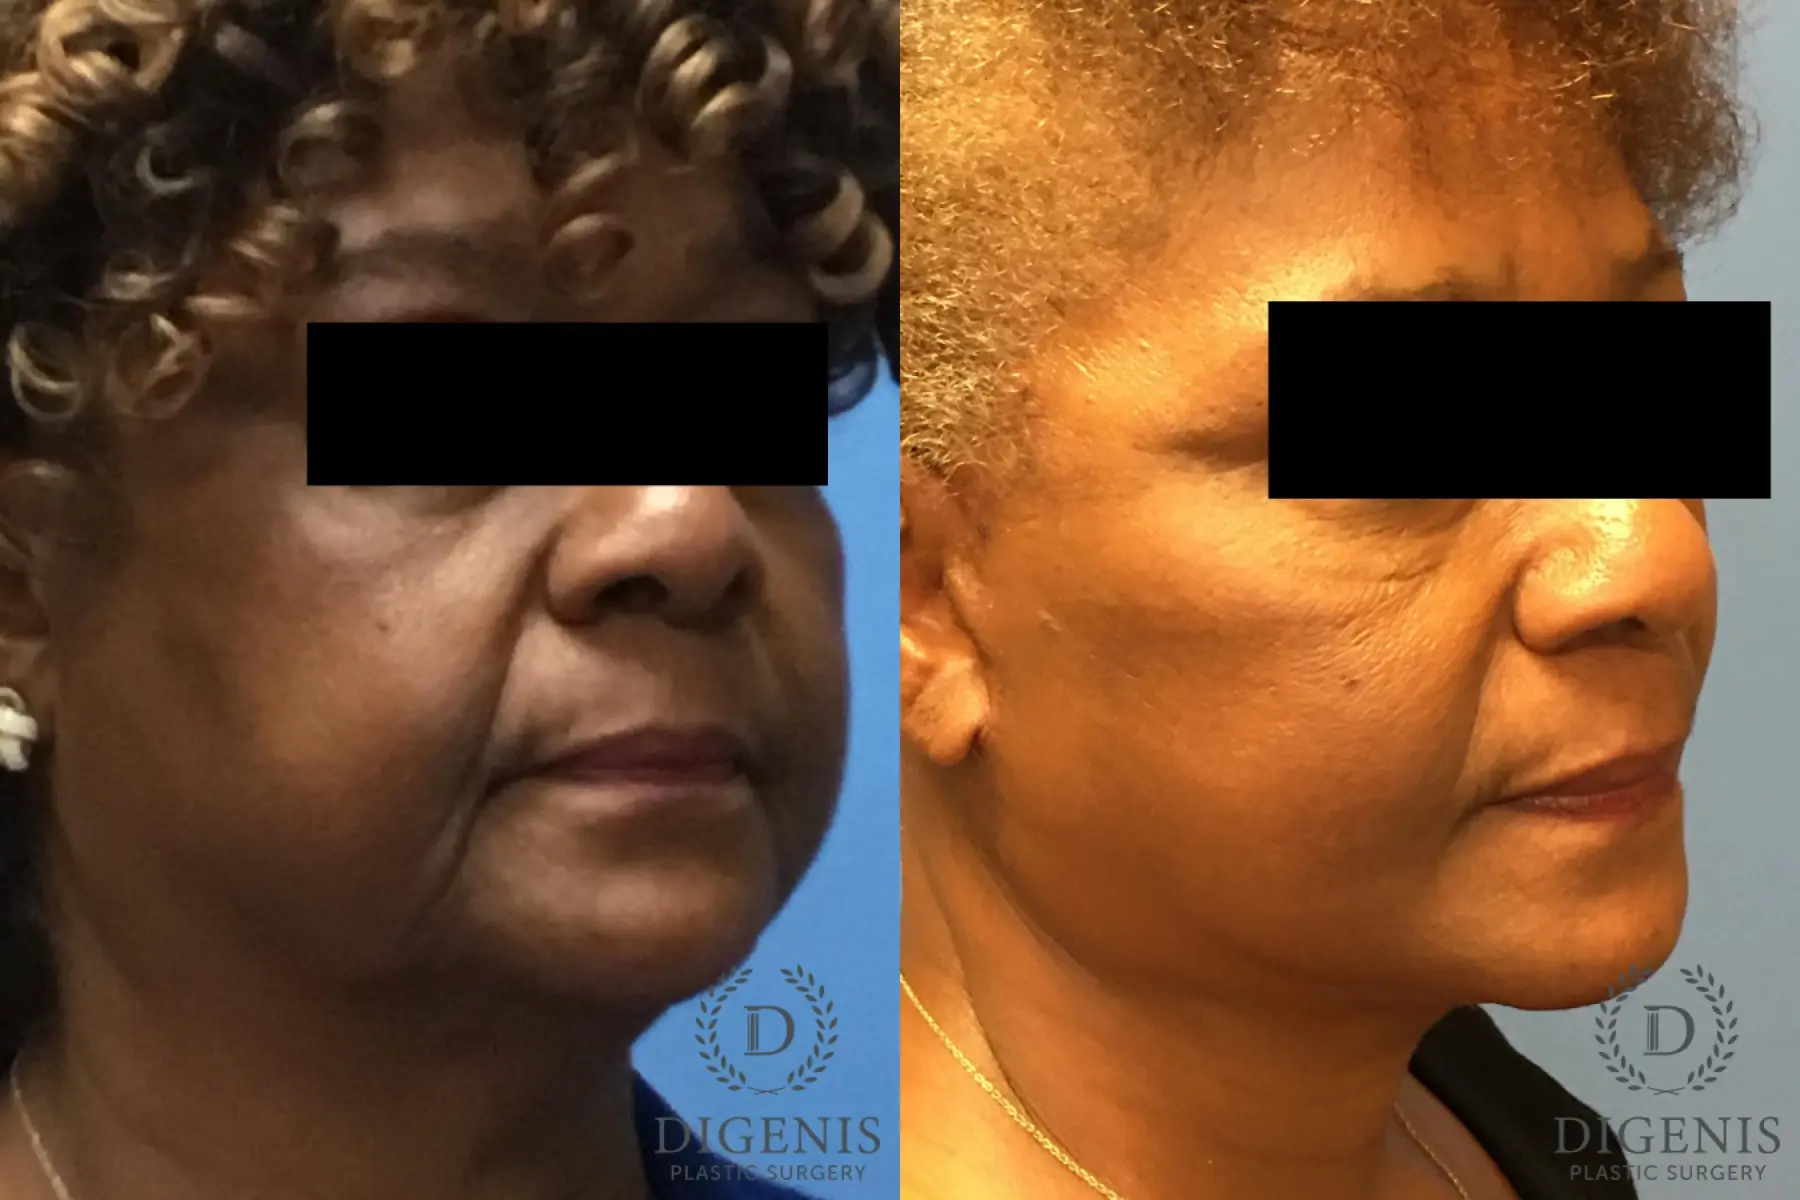 Facelift: Patient 8 - Before and After 2